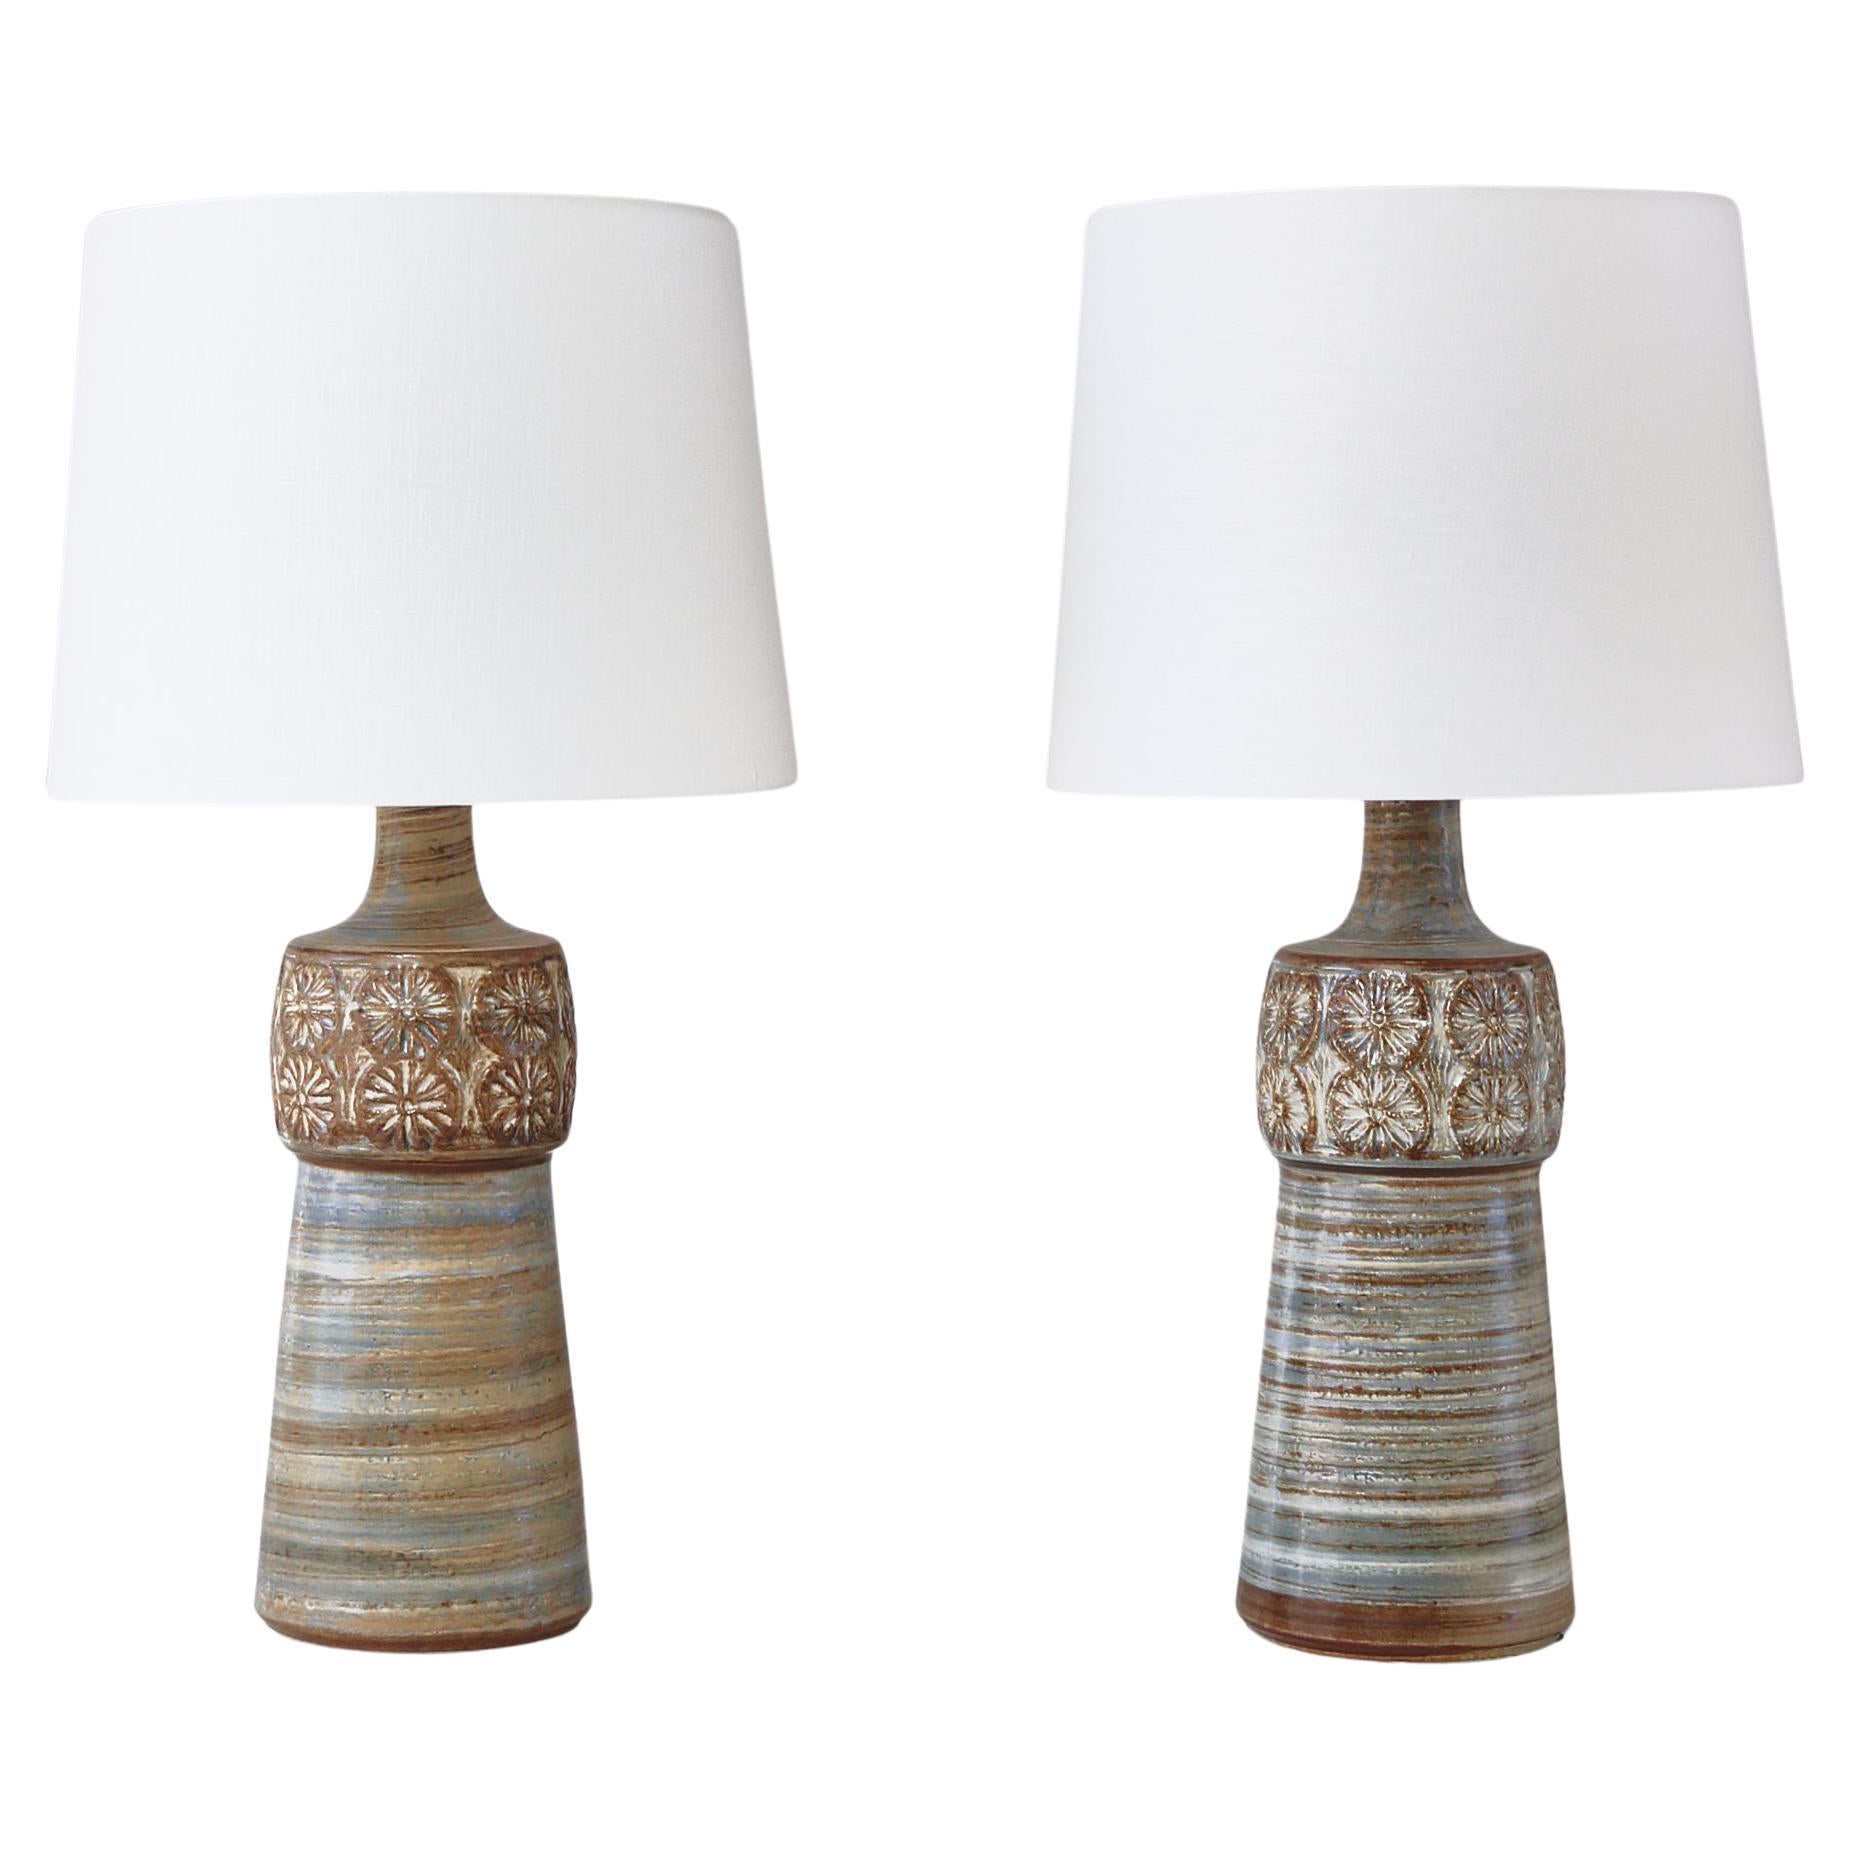 Pair of Unique Danish Modern Stoneware Table Lamps by Søholm, Denmark, 1960s For Sale